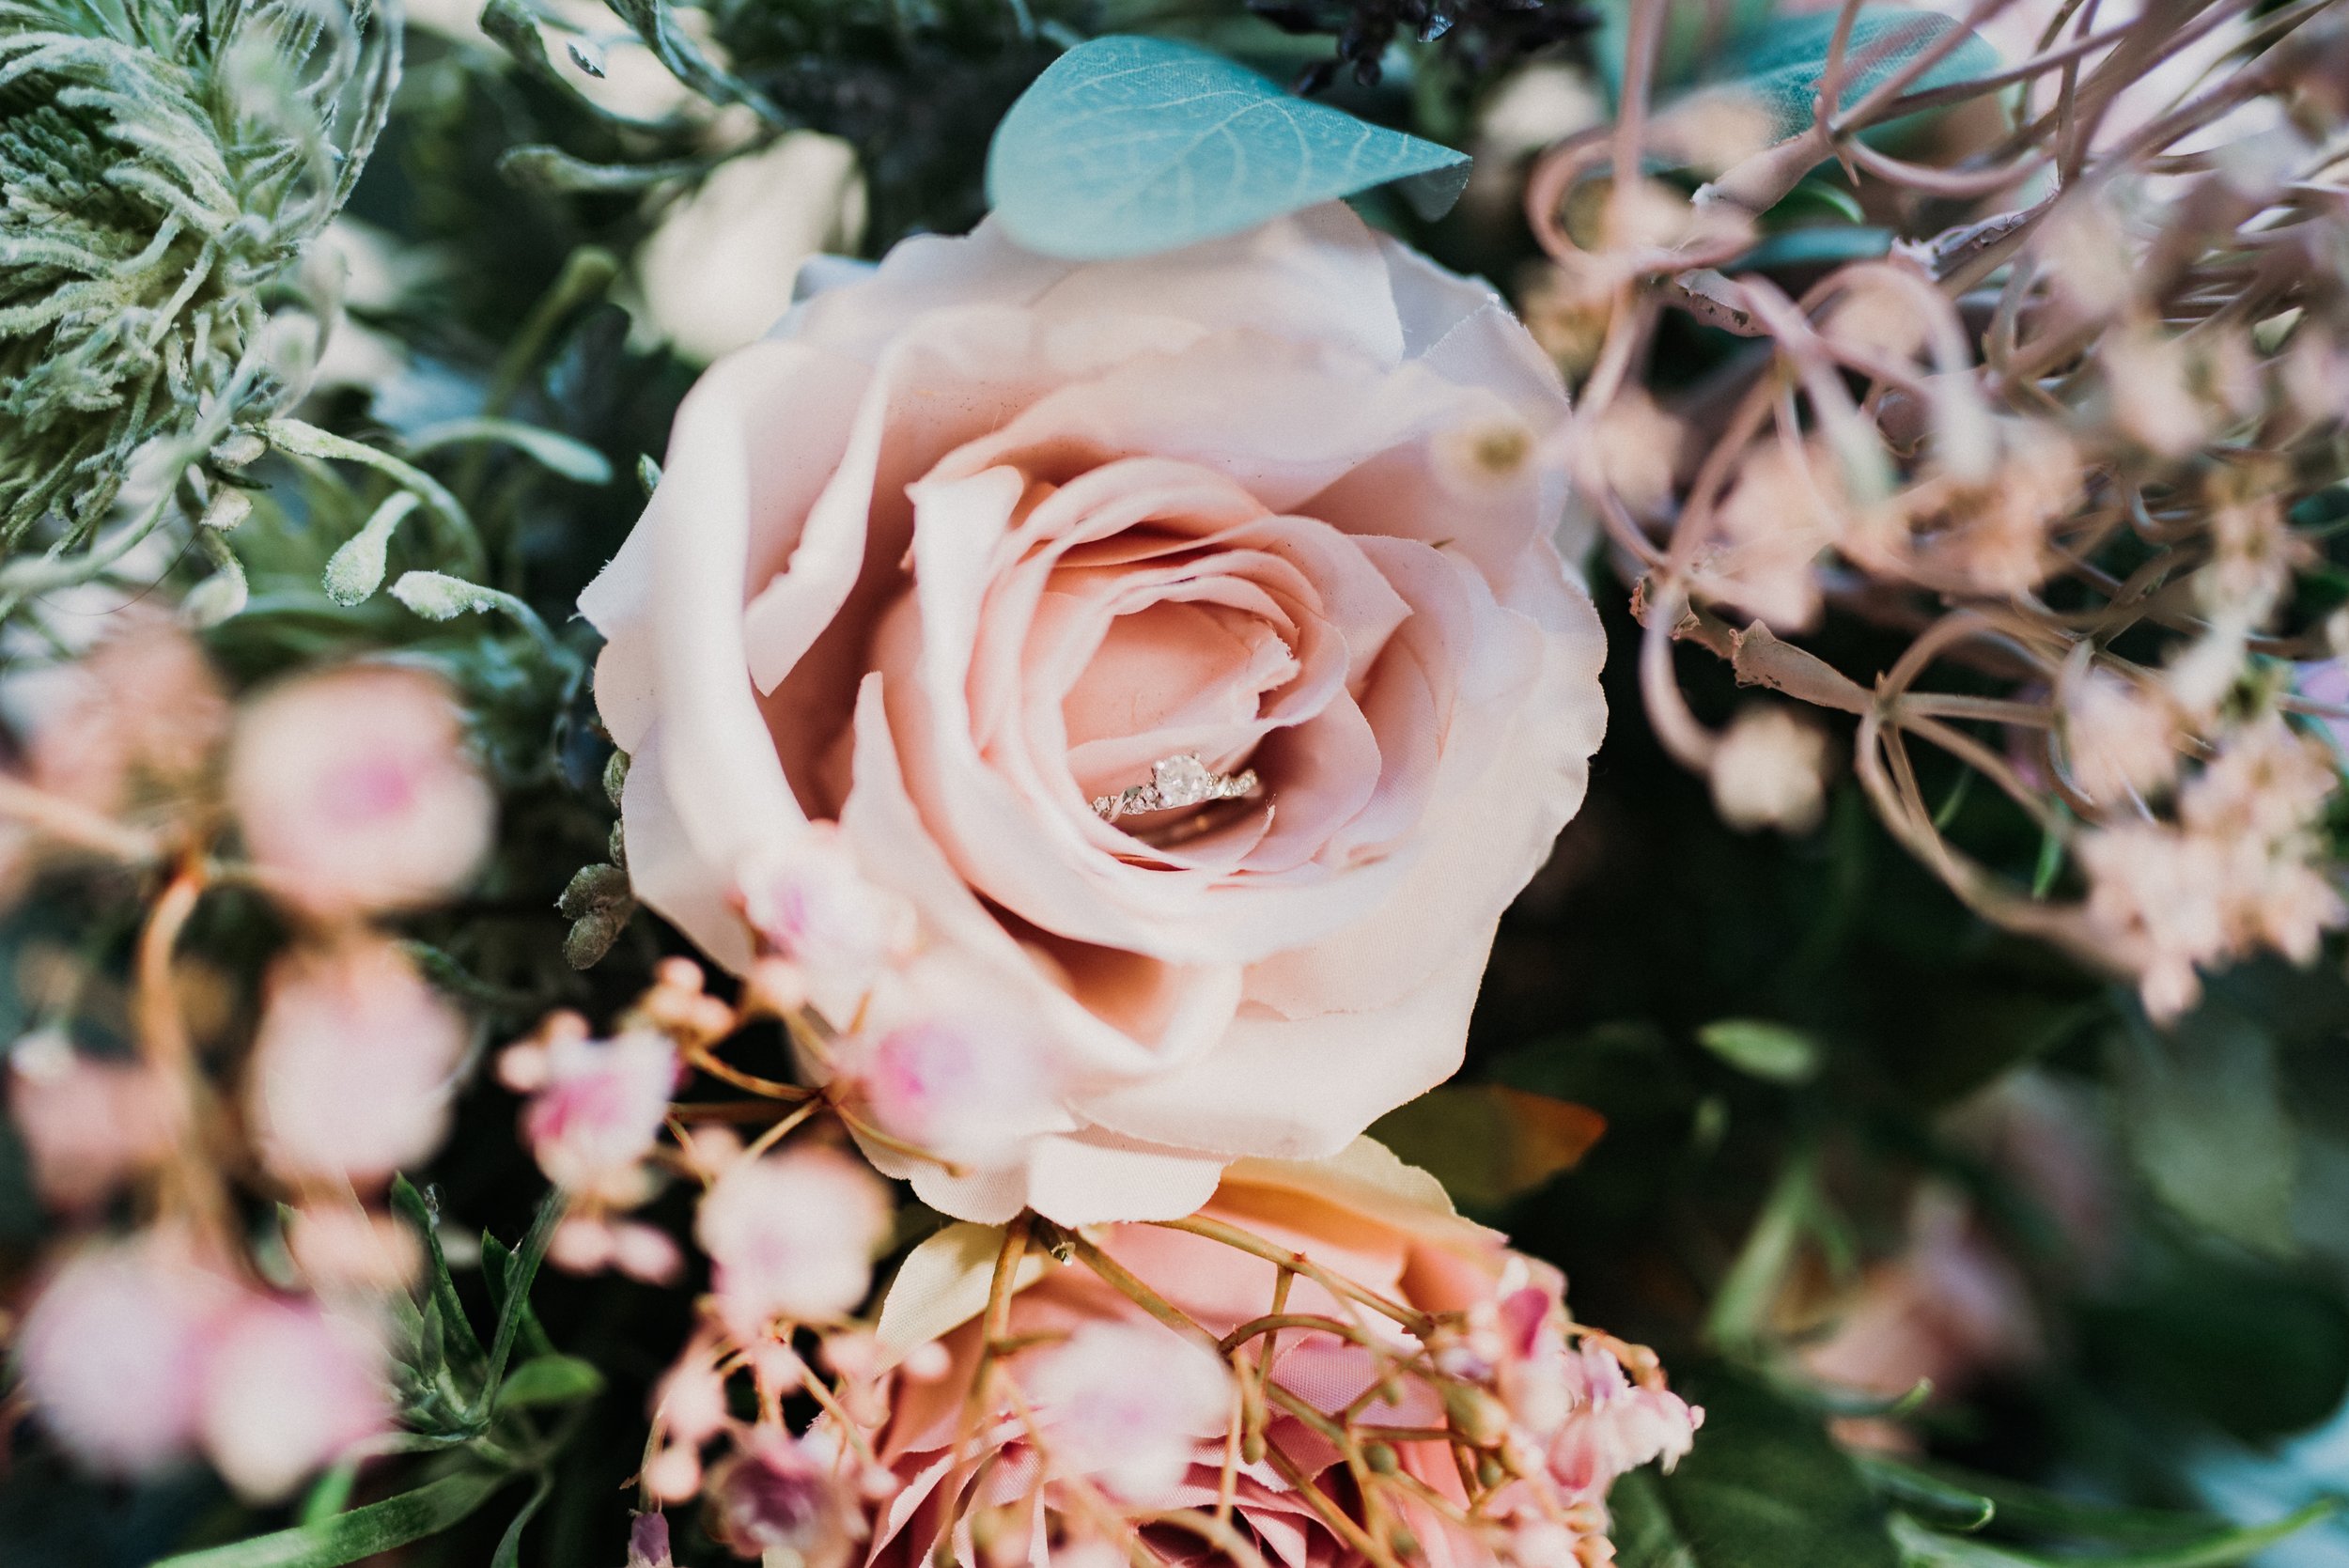 The bride's engagement ring is nestled in the petals of a pink rose in her bridal bouquet.